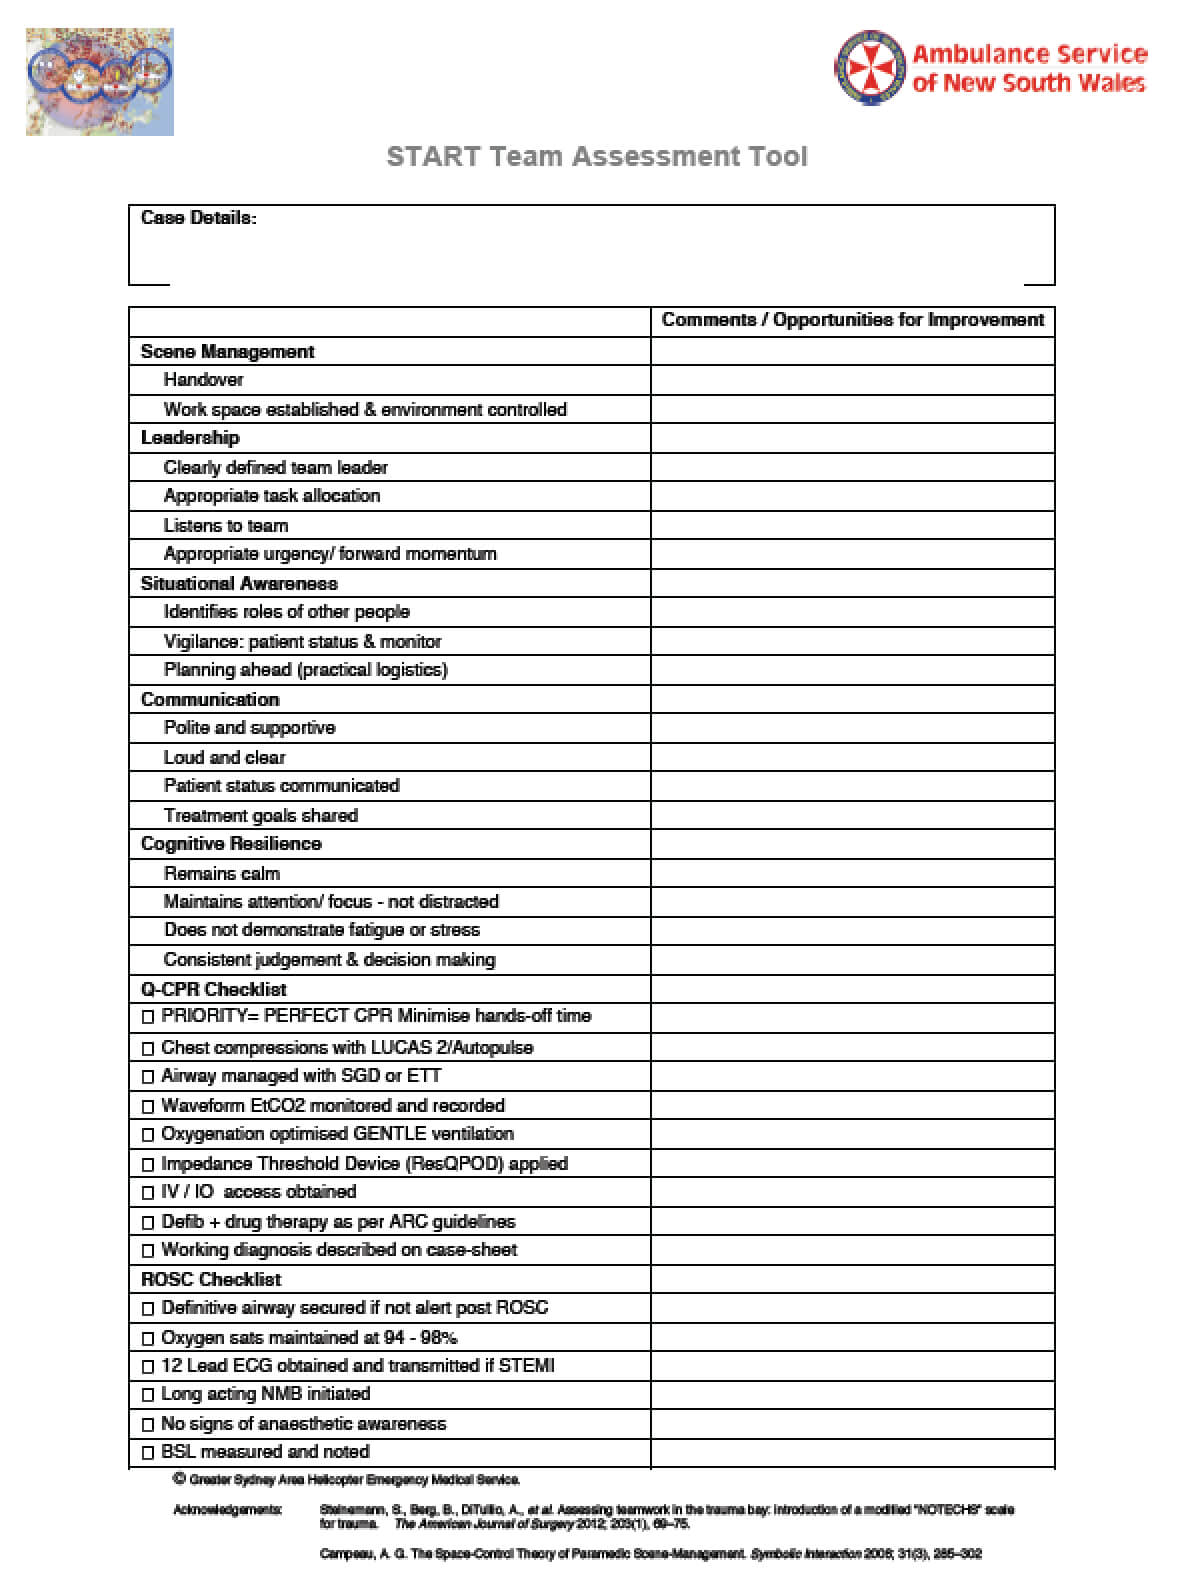 Project Debrief Checklist The Importance Of Debriefing With Event Debrief Report Template